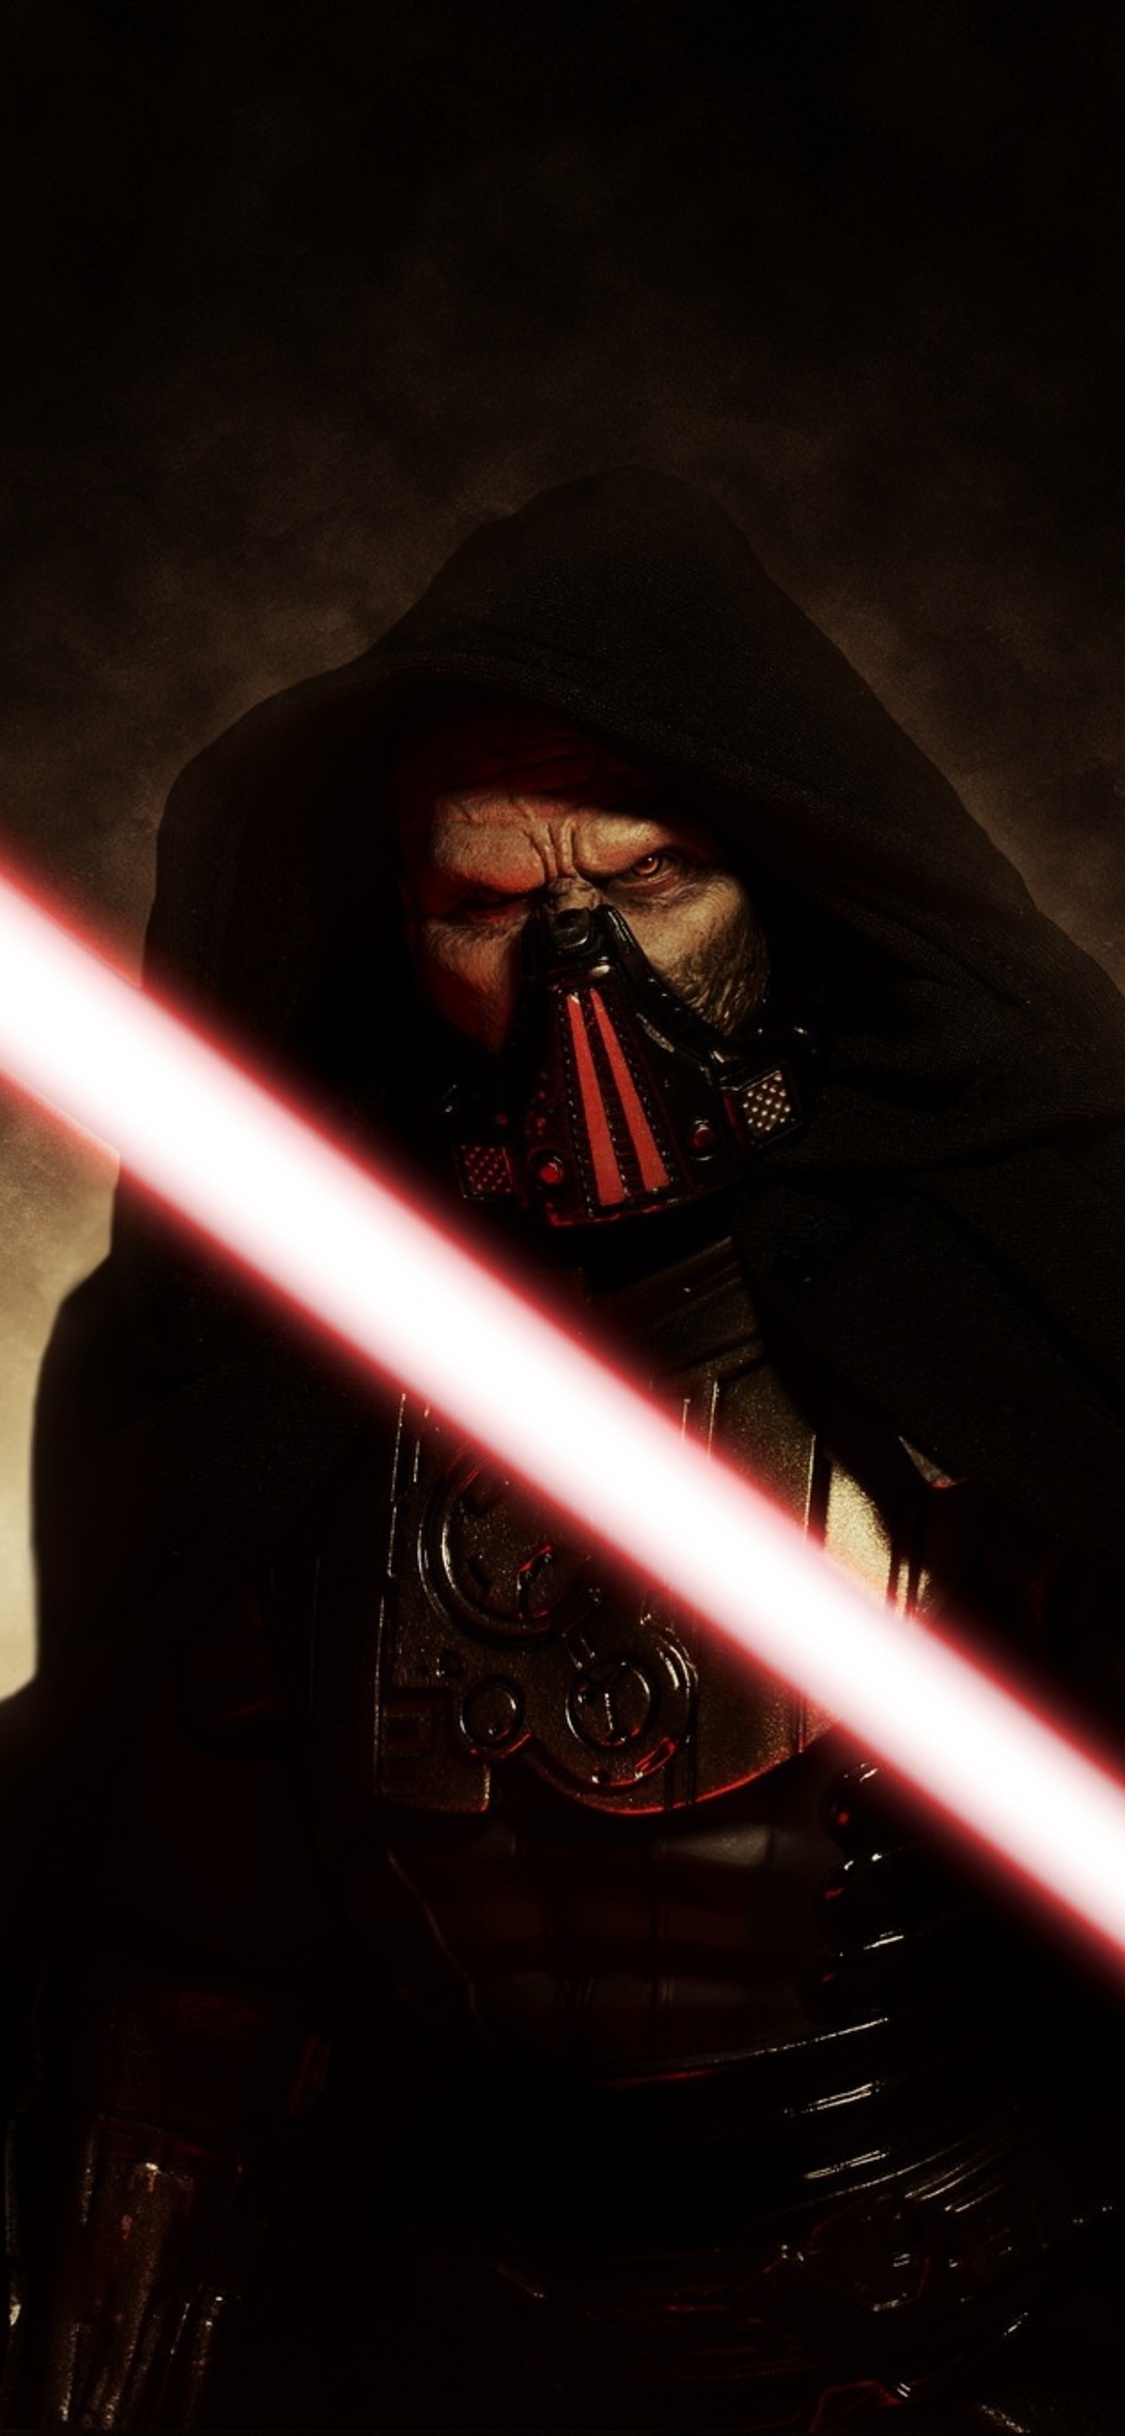 Sith: An ancient monastic and kraterocratic cultist organization of supernaturally gifted Force-wielders. 1130x2440 HD Wallpaper.